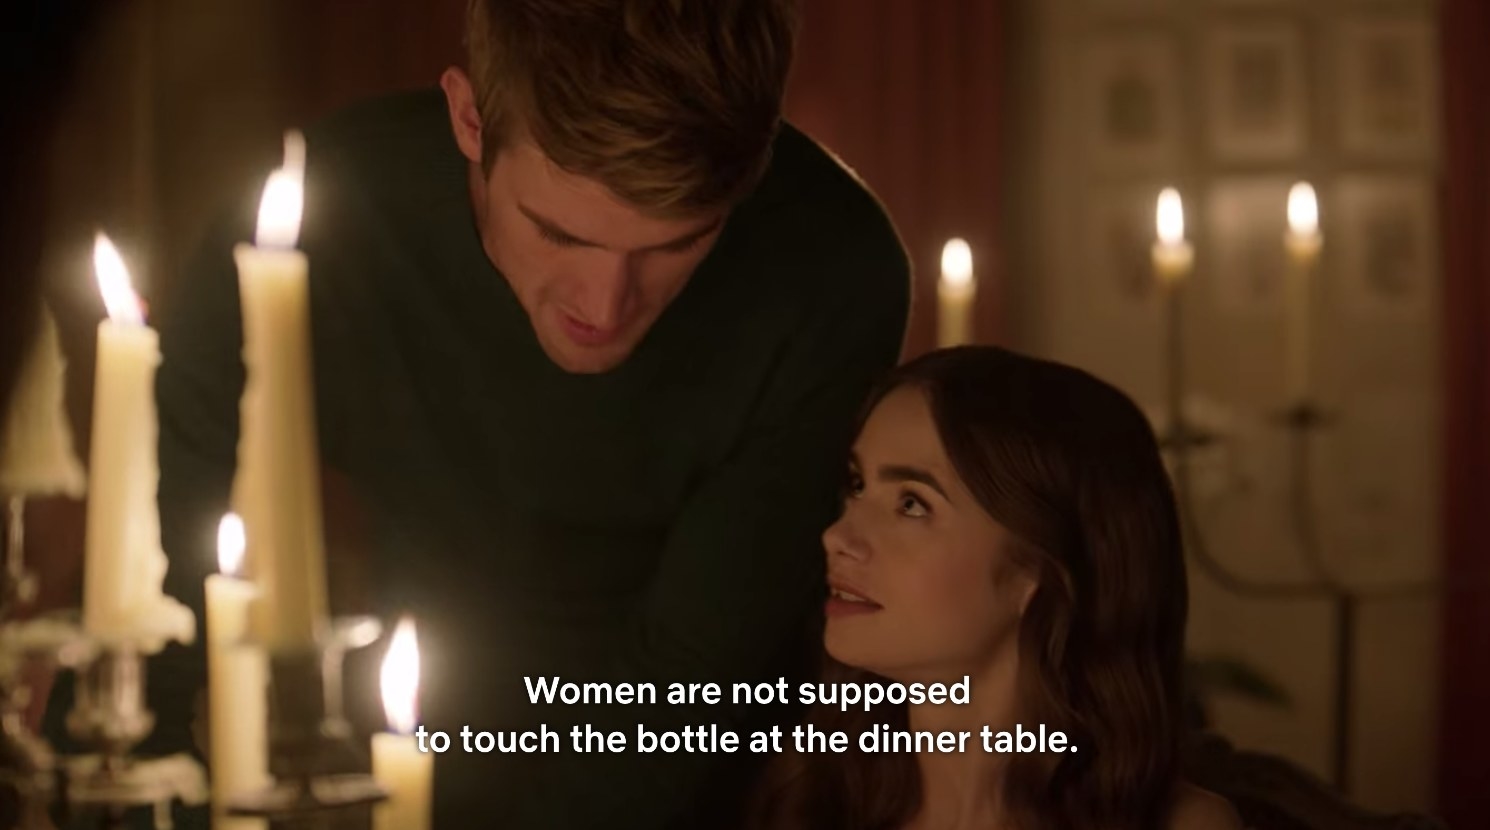 Emily being told &quot;Women are not supposed to touch the bottle at the dinner table.&quot;